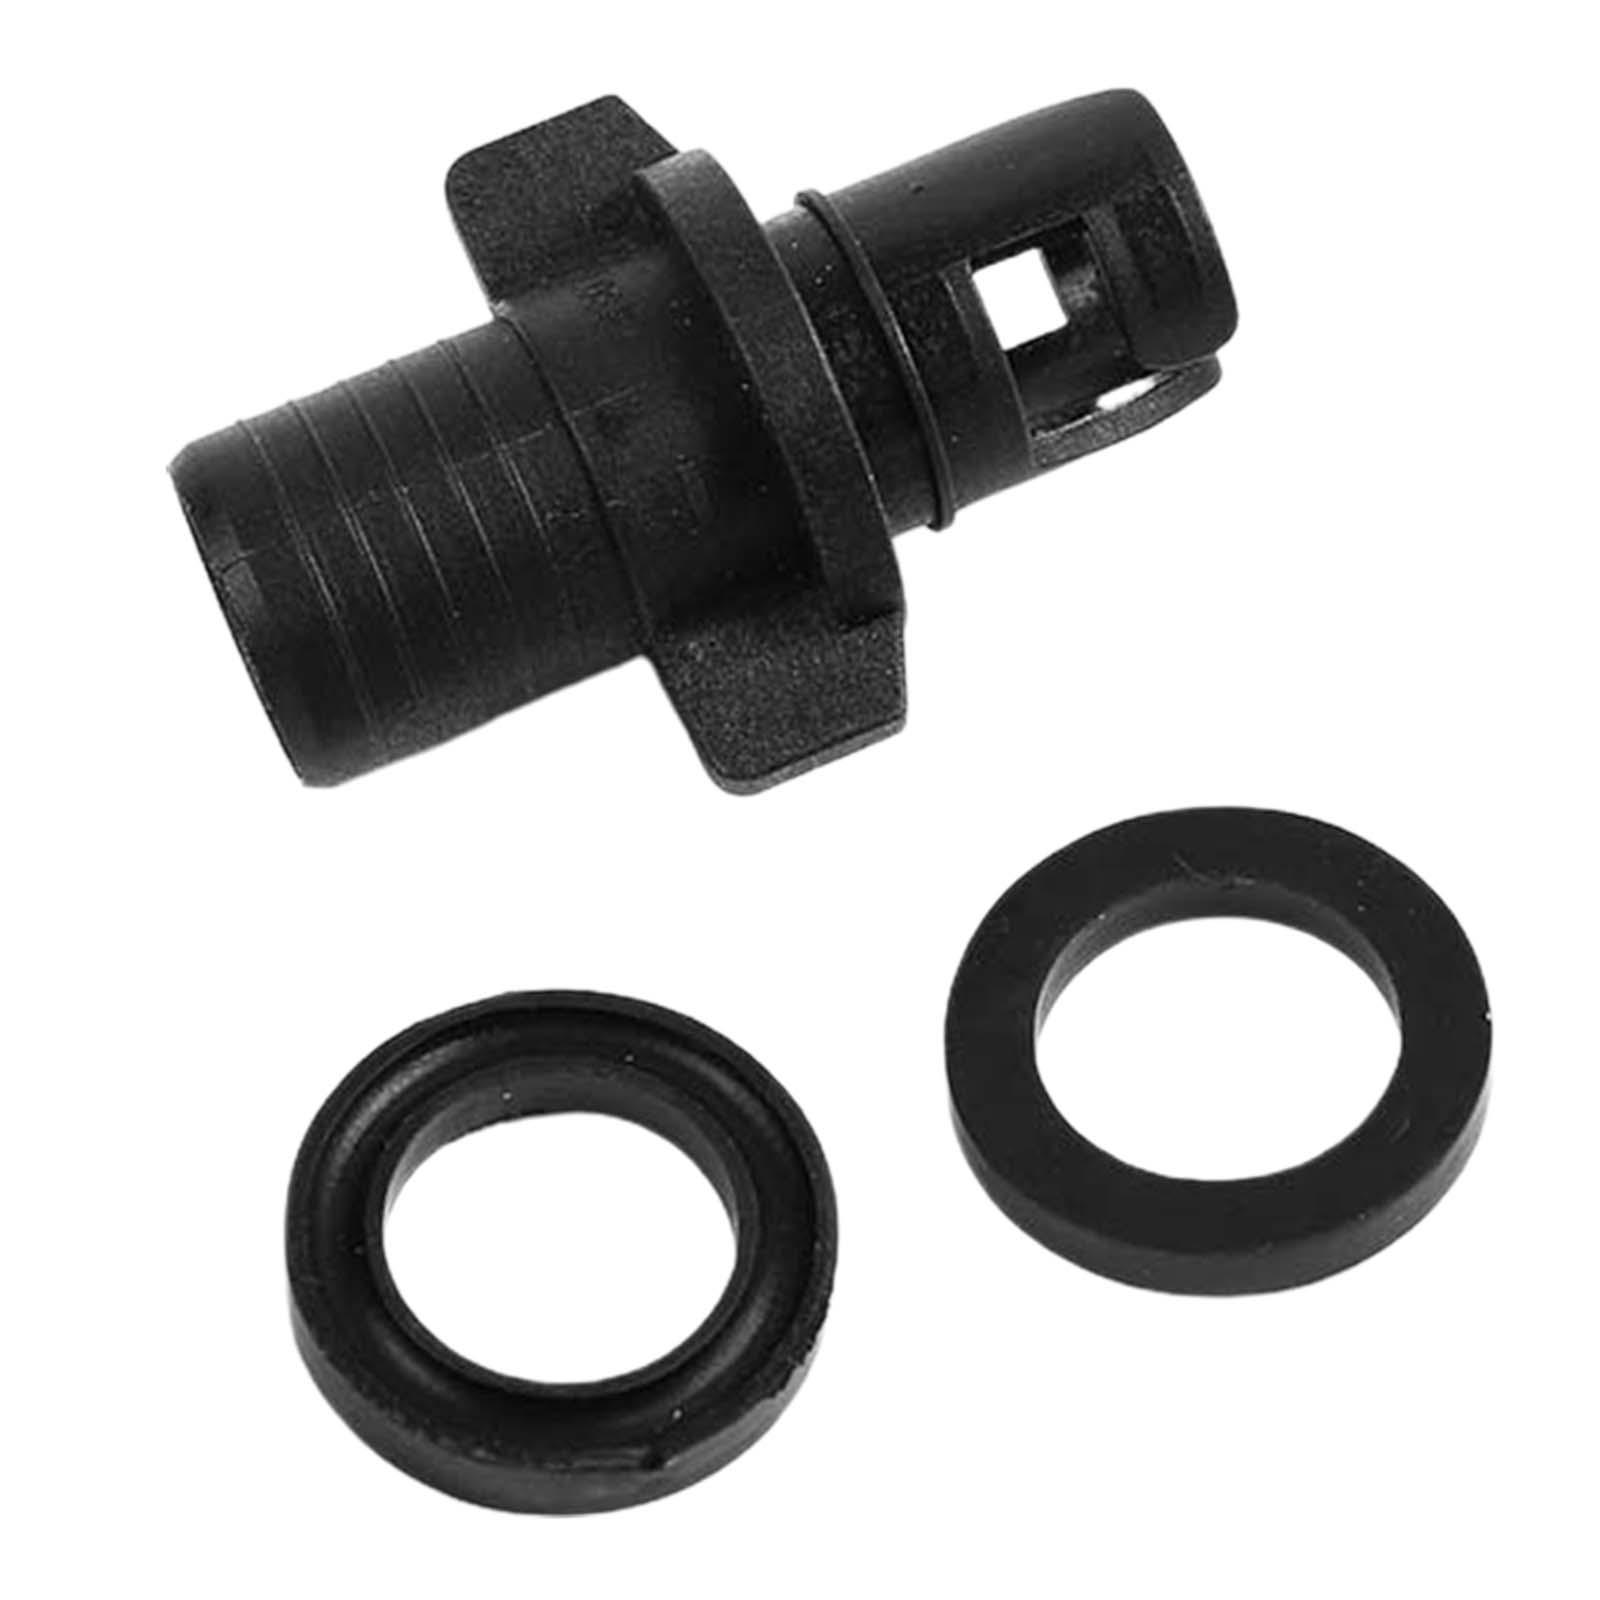 Air Valve Adapter Multifunction Connector Kayak Pump Hose Valve Adapter for Paddle Board Dinghy Rubber Boats Fishing Boats